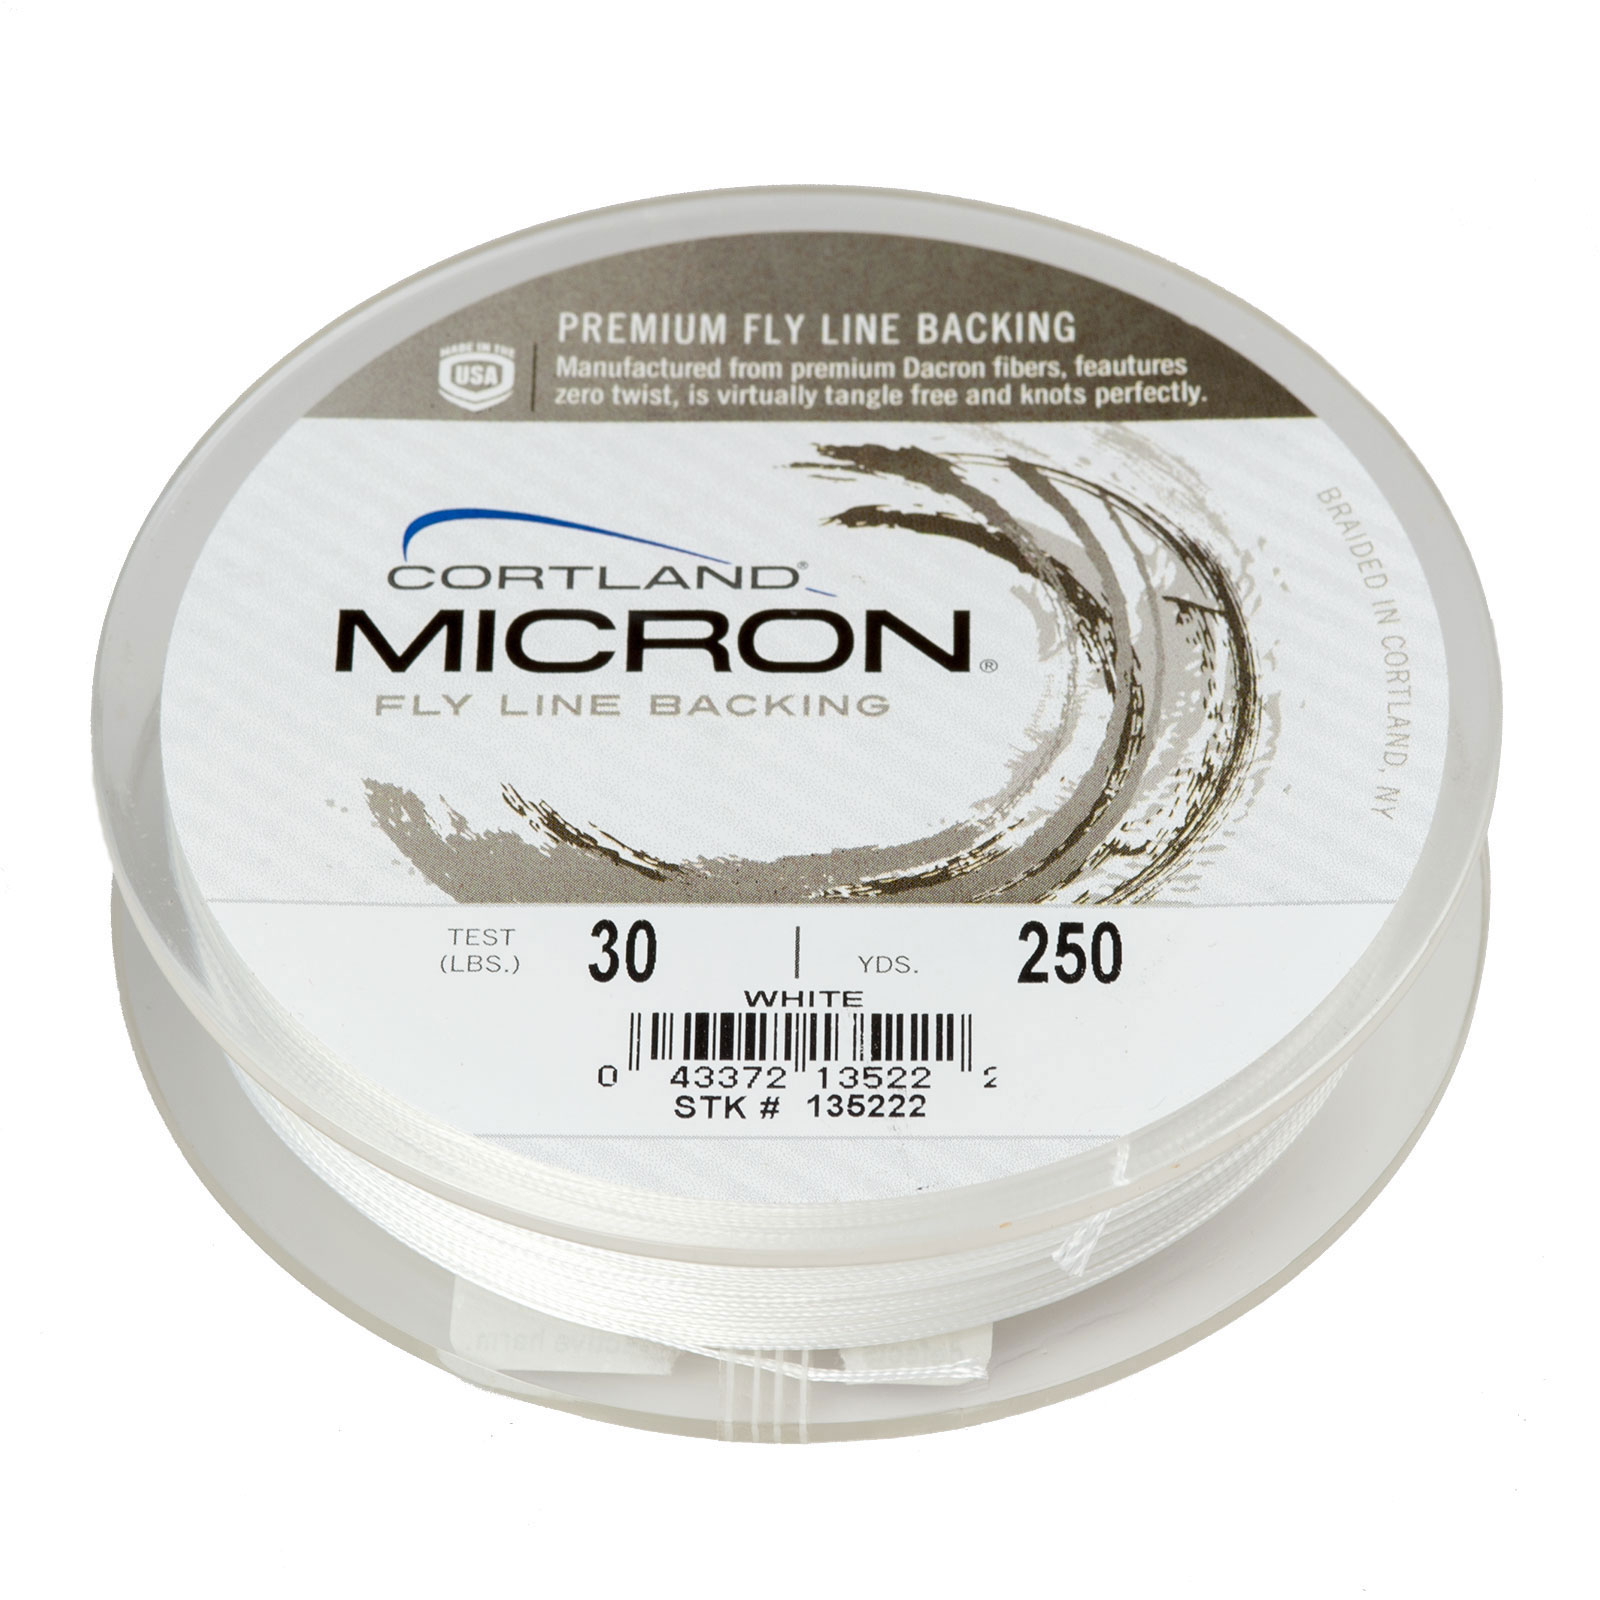 Cortland Fly Line Backing 30lb Micron WHITE GREAT NEW